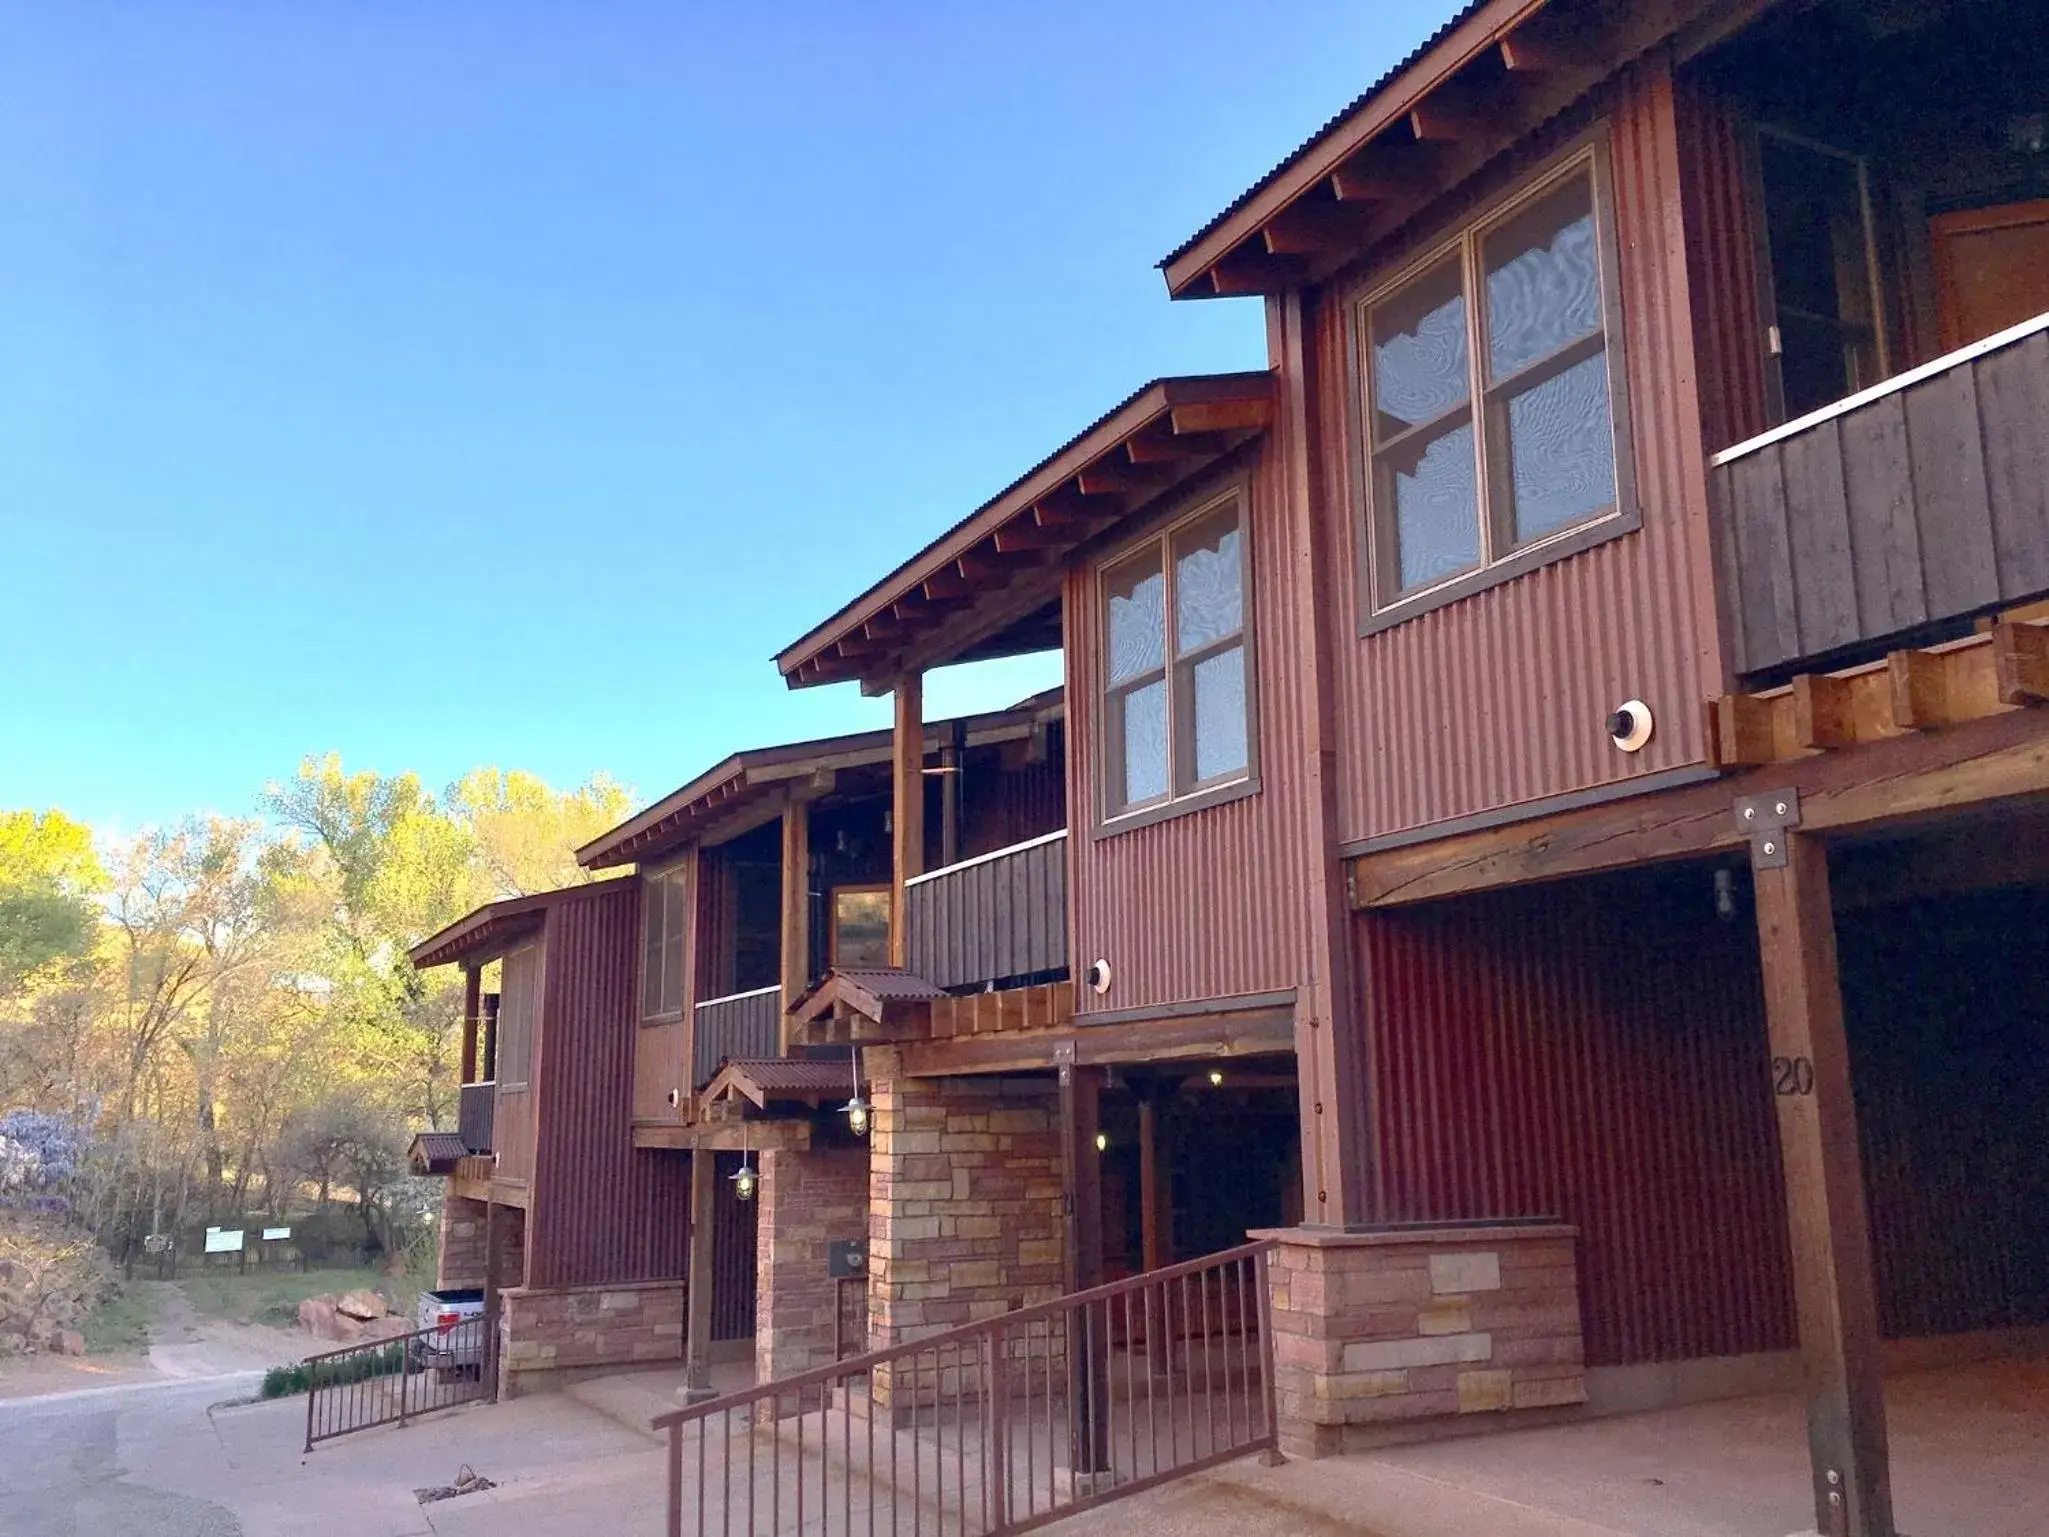 Property Building in Moab Springs Ranch